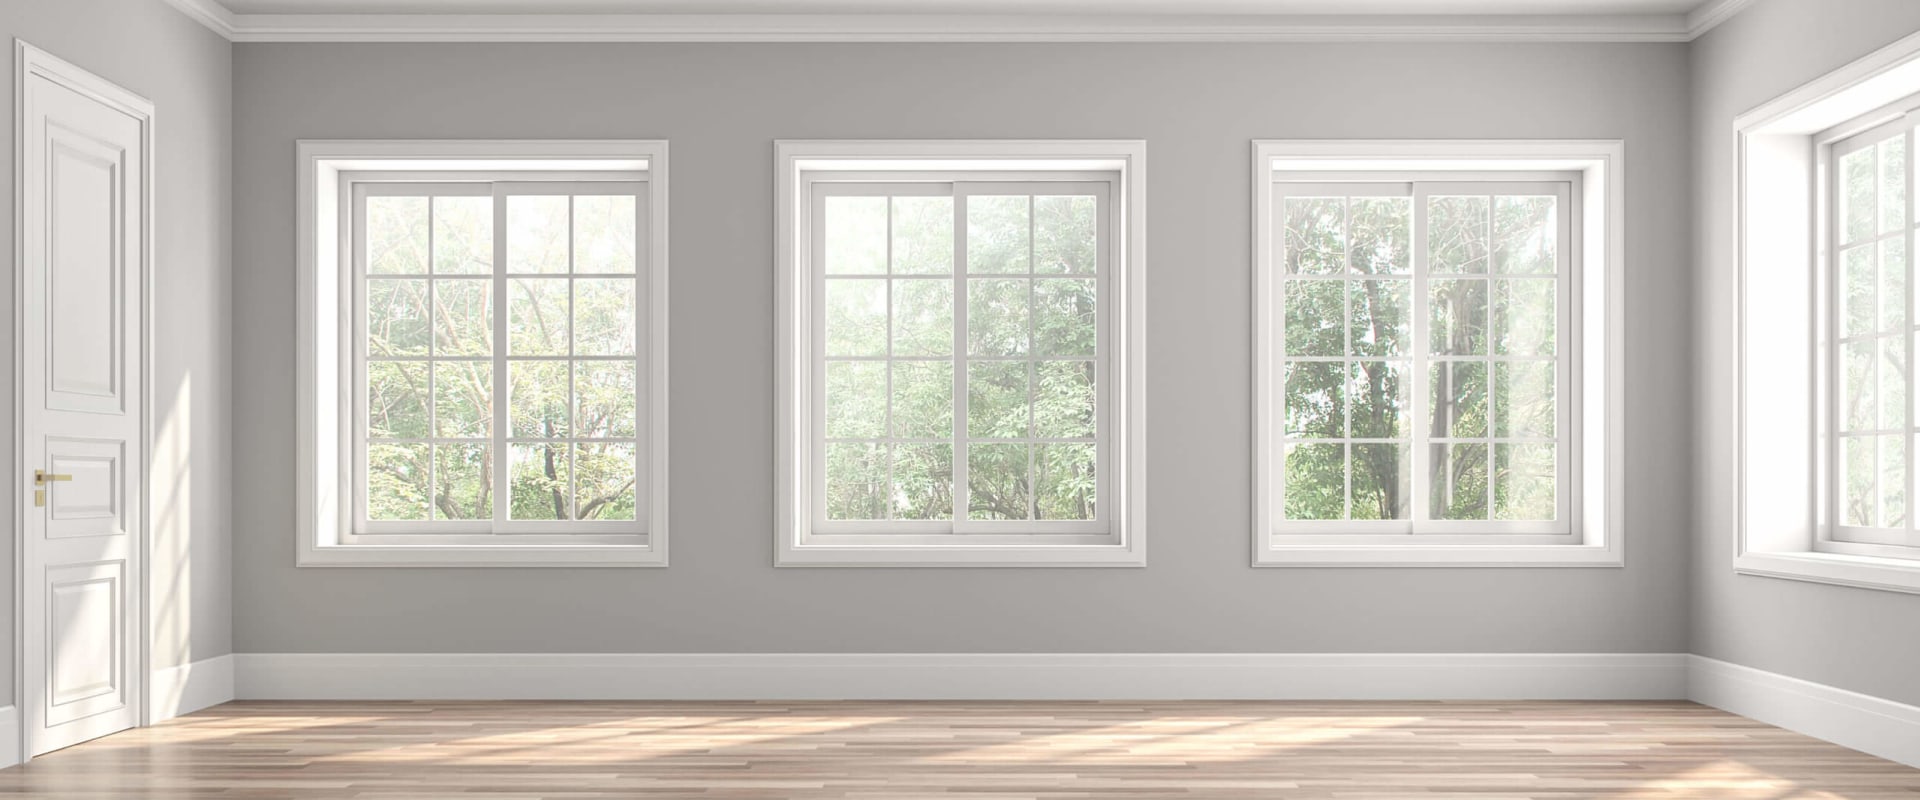 Are Home Depot Replacement Windows Worth It?